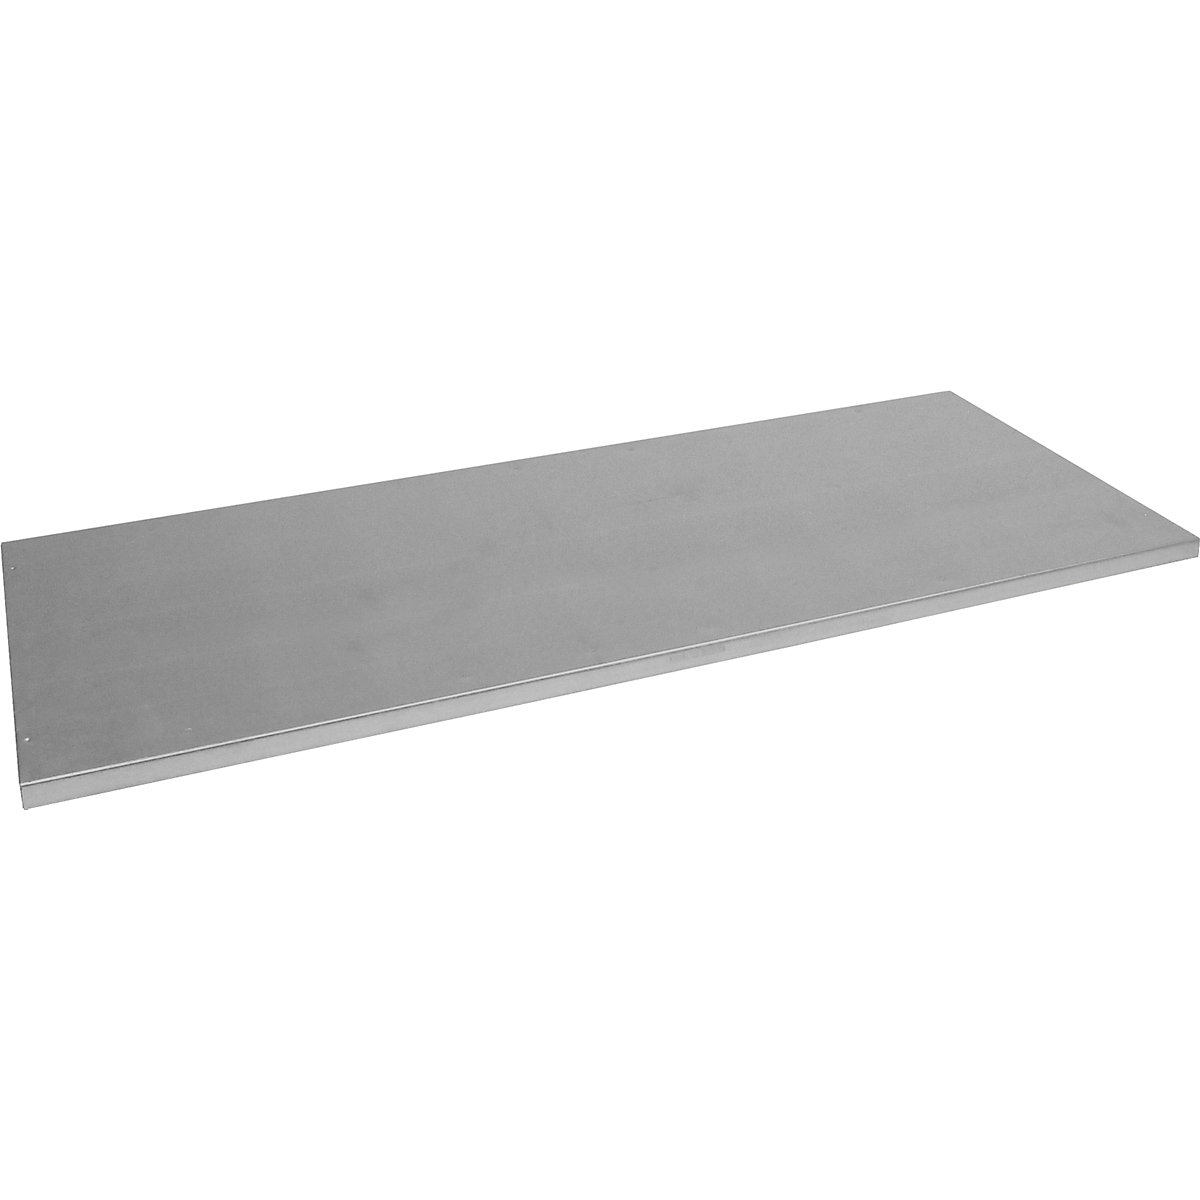 Shelf for vision panel cupboard – mauser, zinc plated, for WxD 950 x 500 mm-3